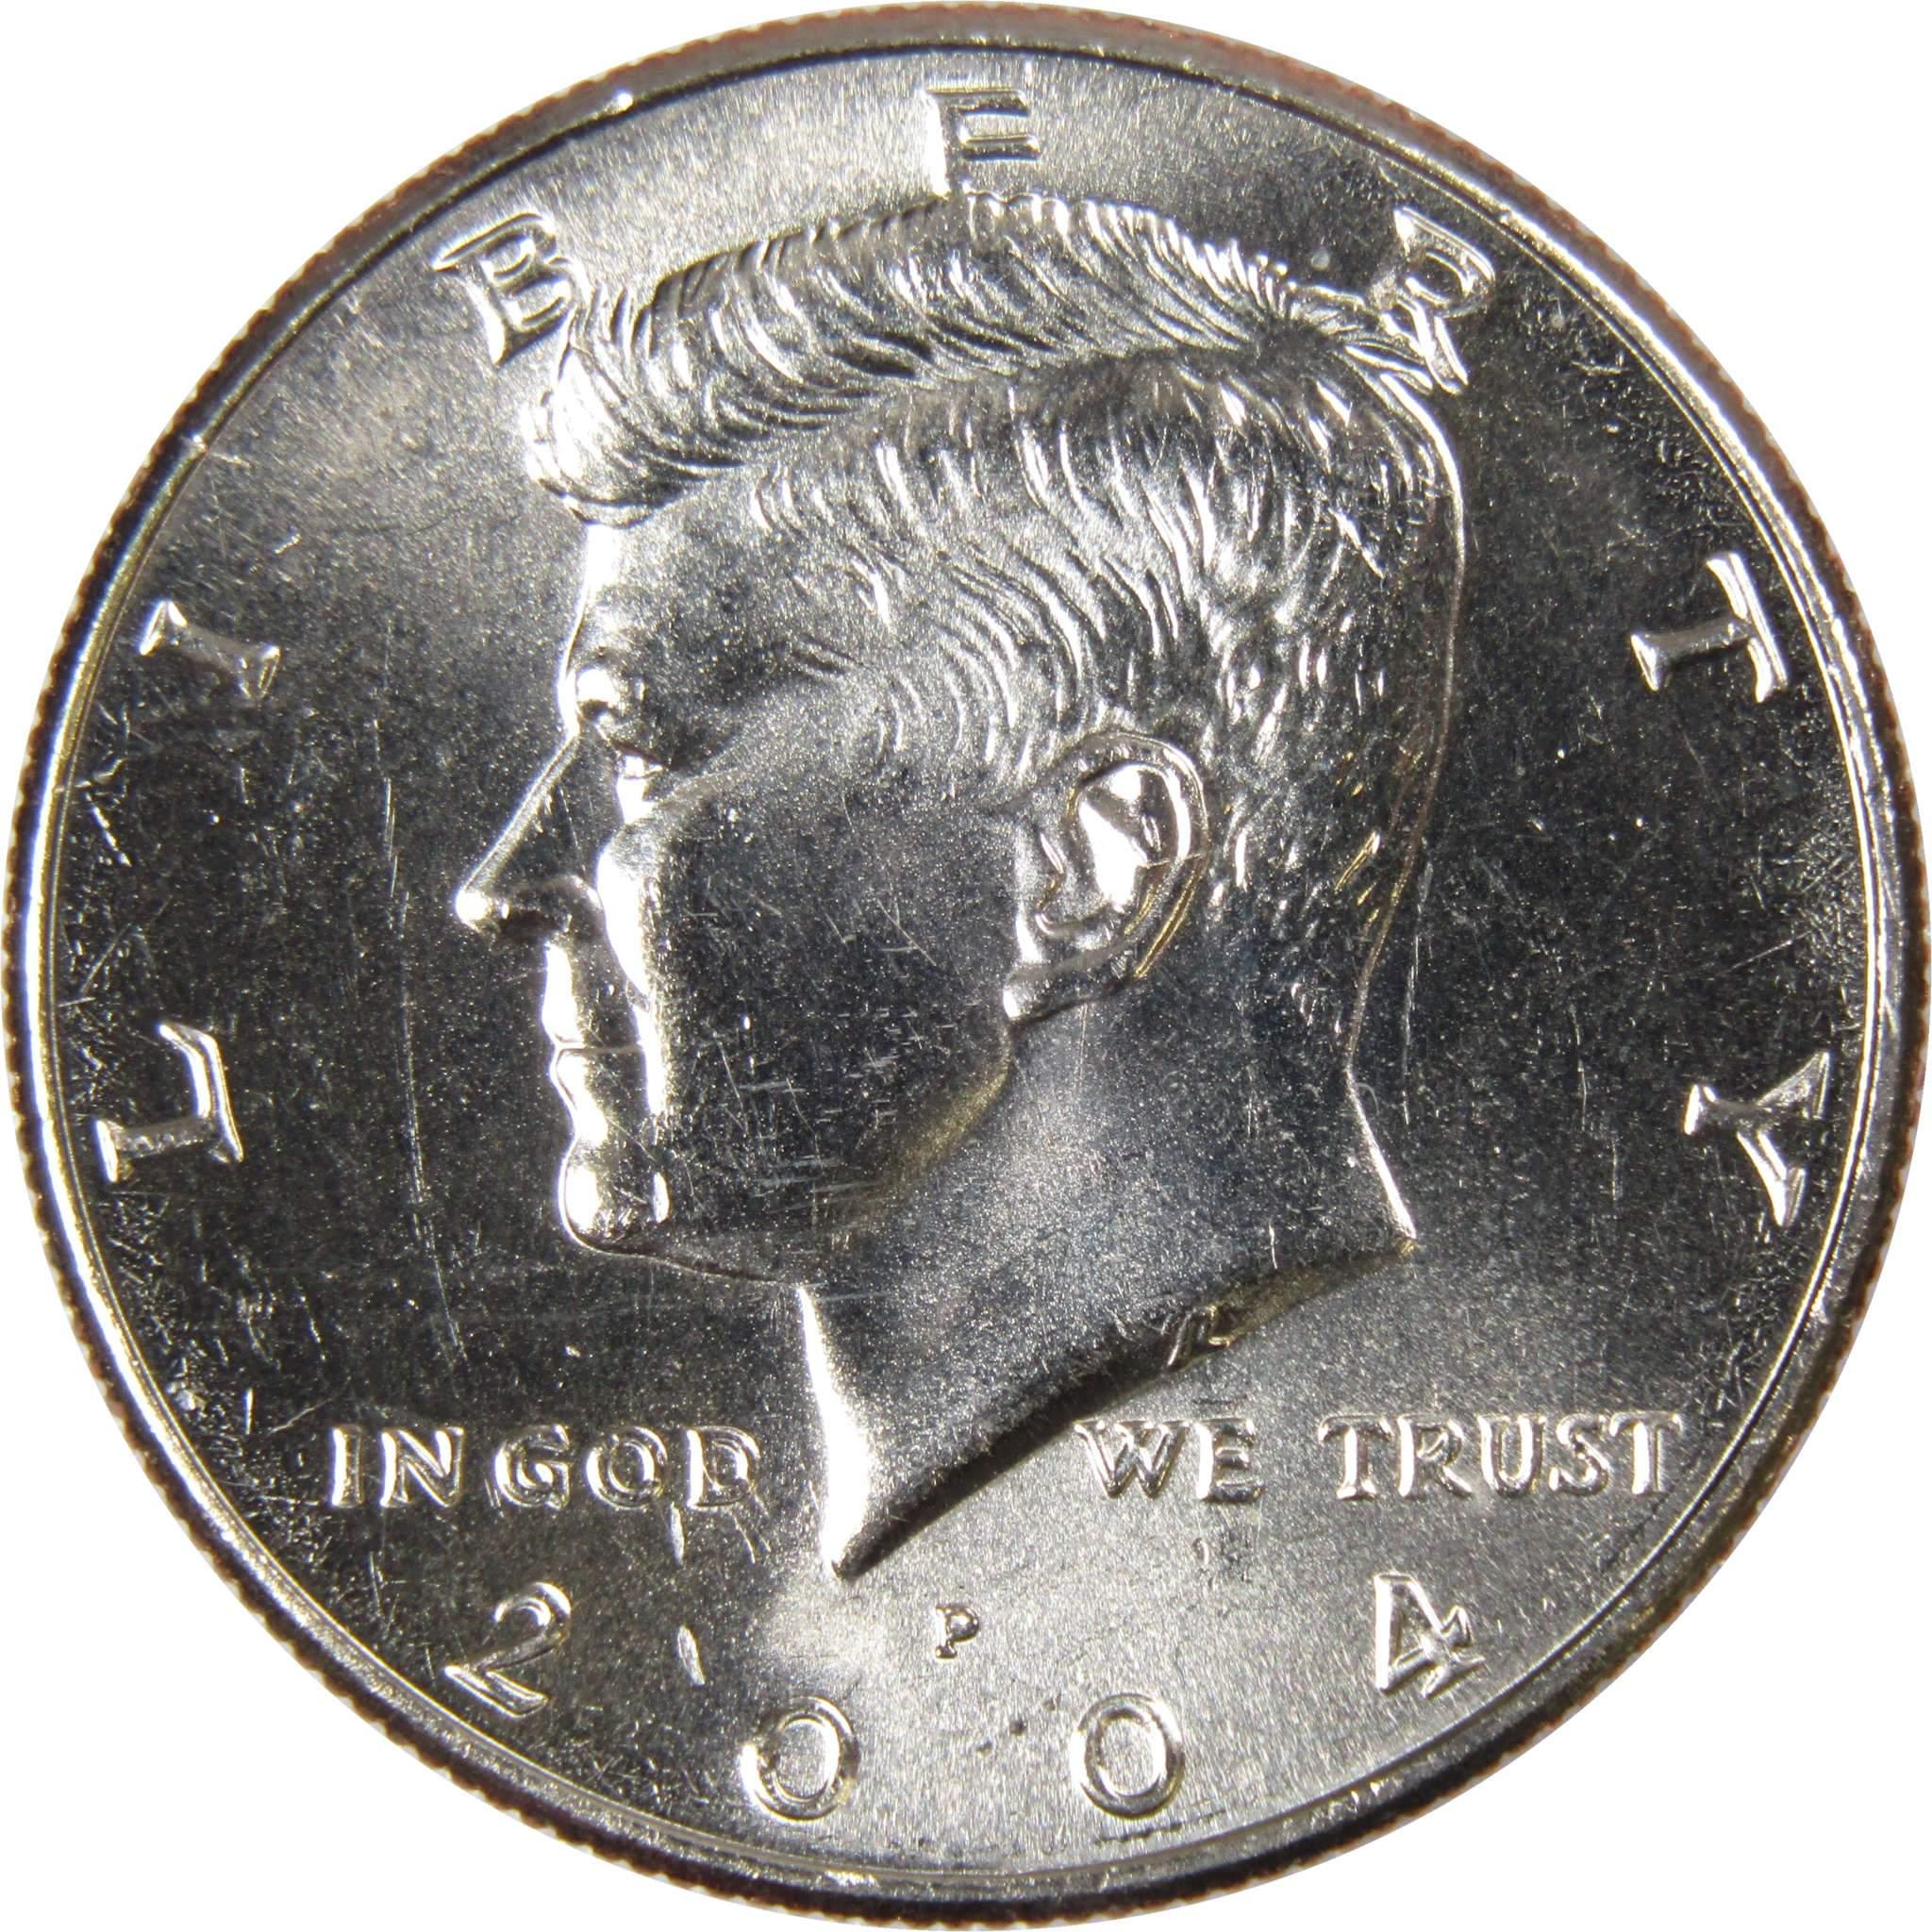 2004 P Kennedy Half Dollar BU Uncirculated Mint State 50c US Coin Collectible